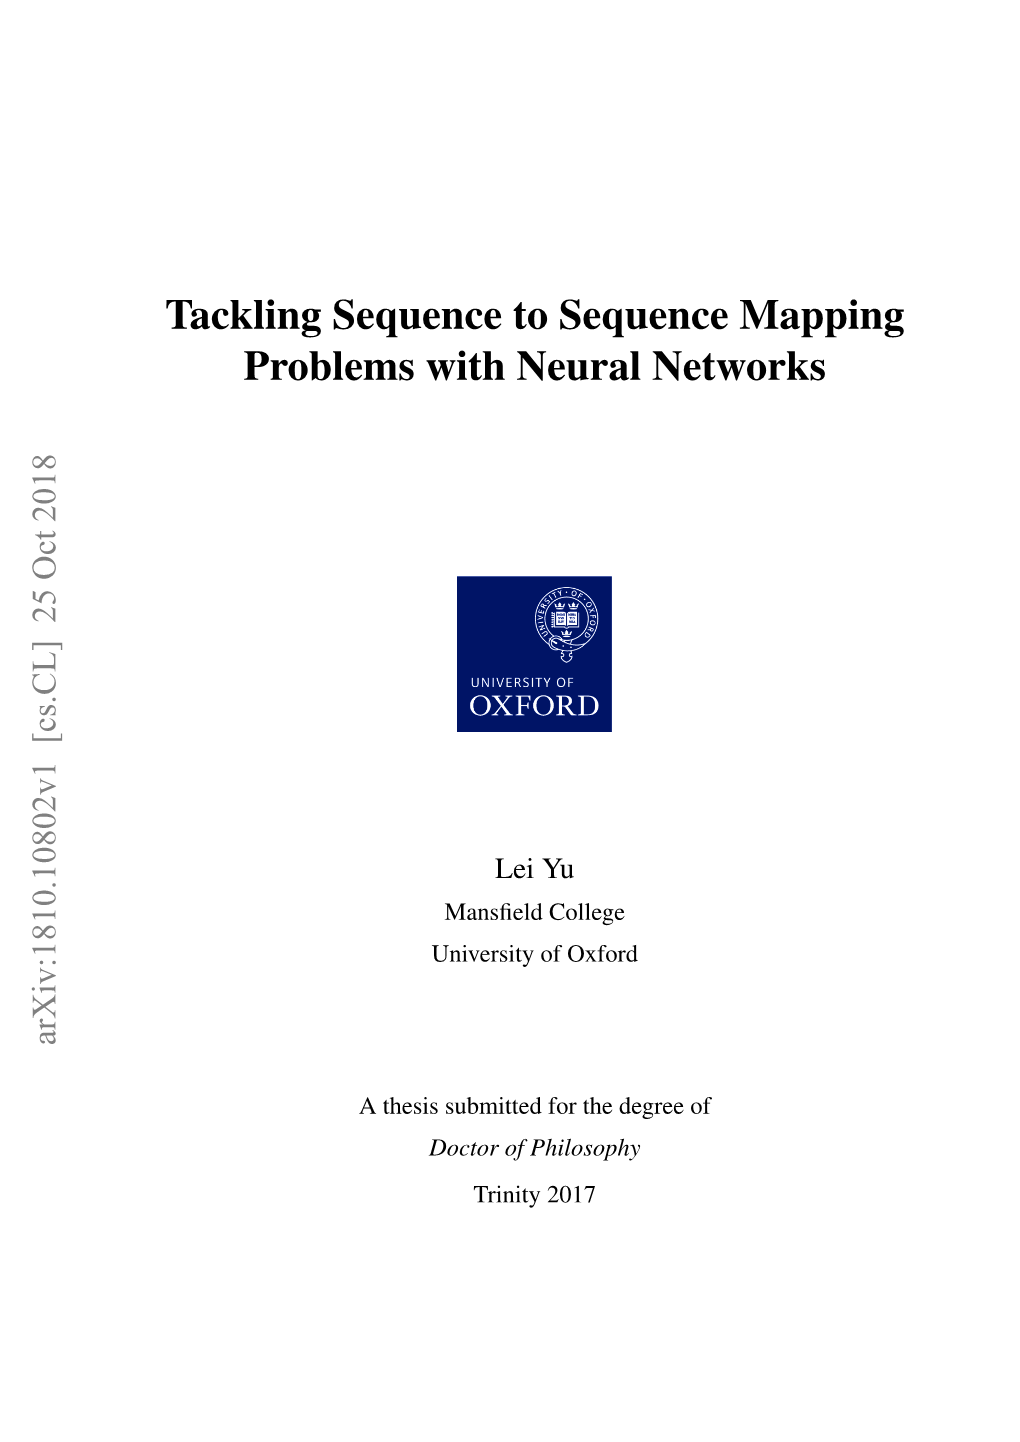 Tackling Sequence to Sequence Mapping Problems with Neural Networks